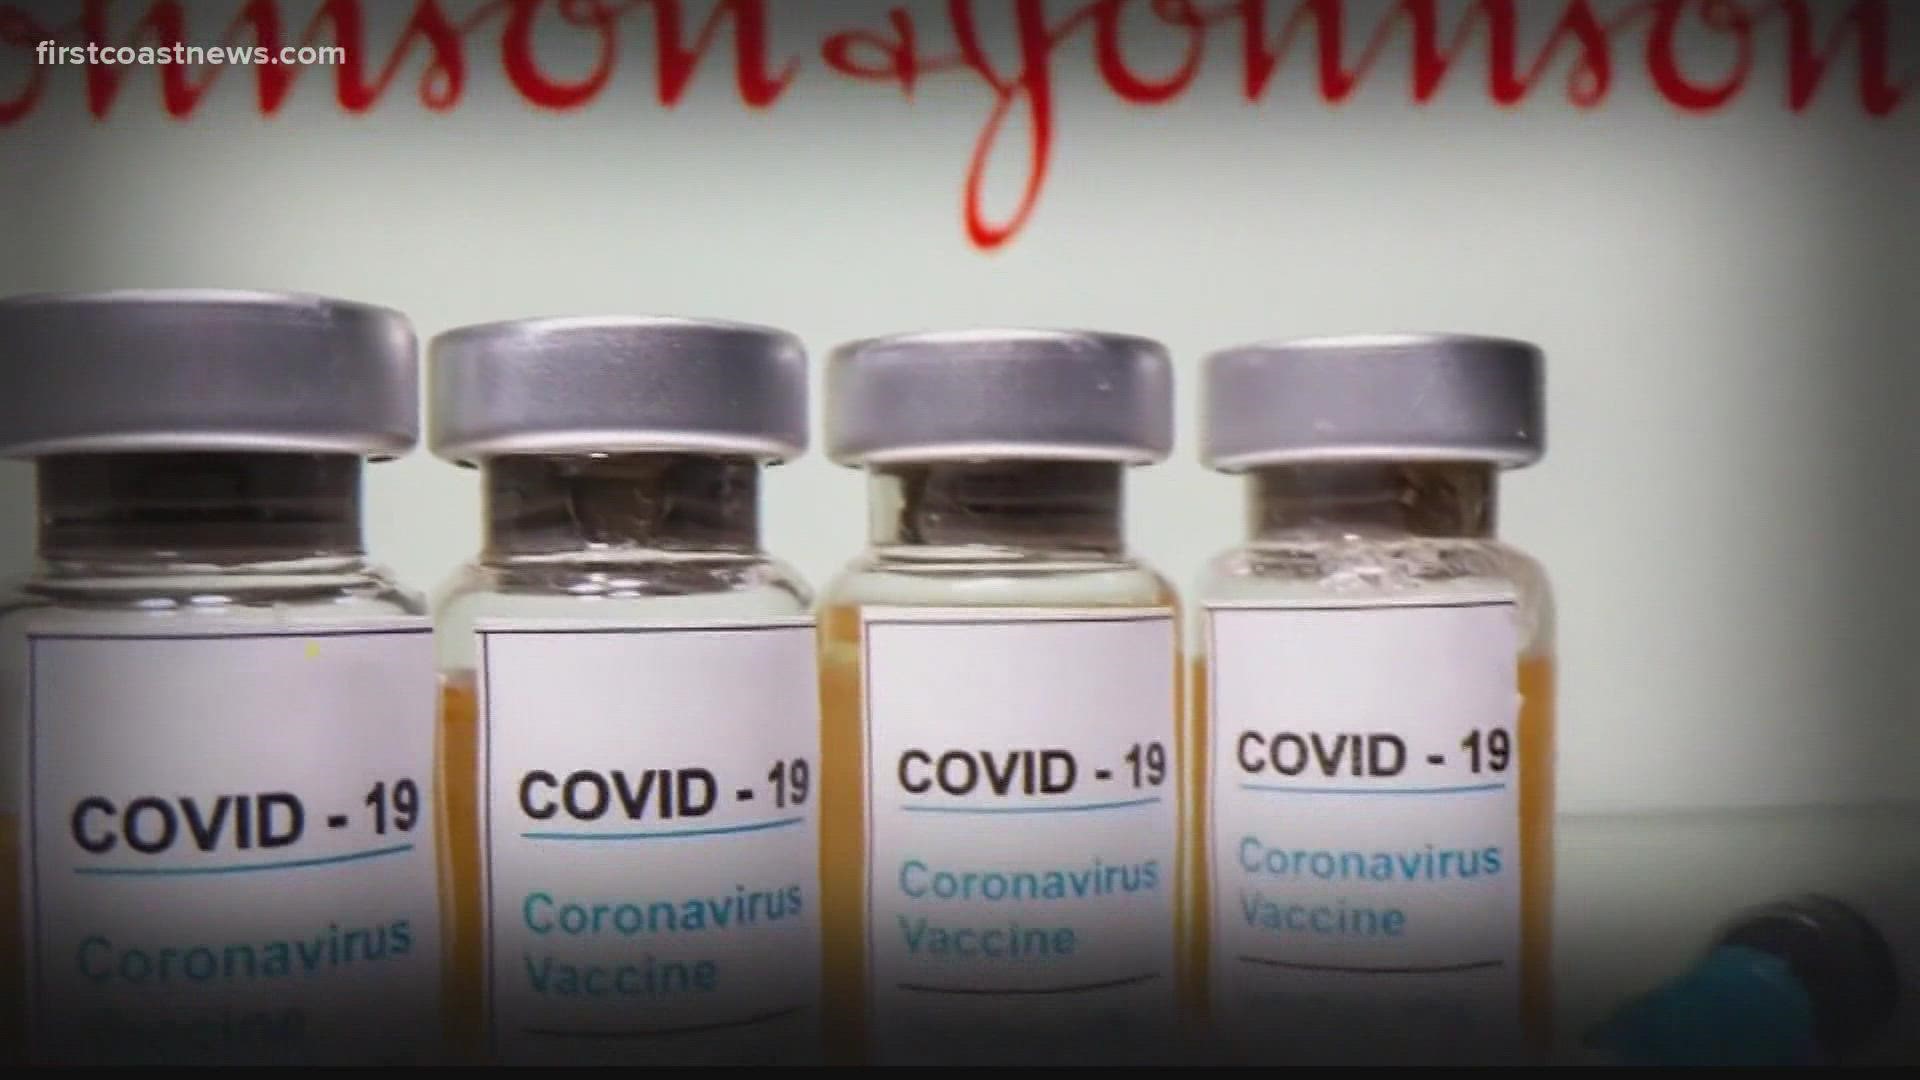 The Centers for Disease Control and Prevention are recommending a third shot for those who got the Pfizer and Moderna COVID-19 vaccines eight months after the second